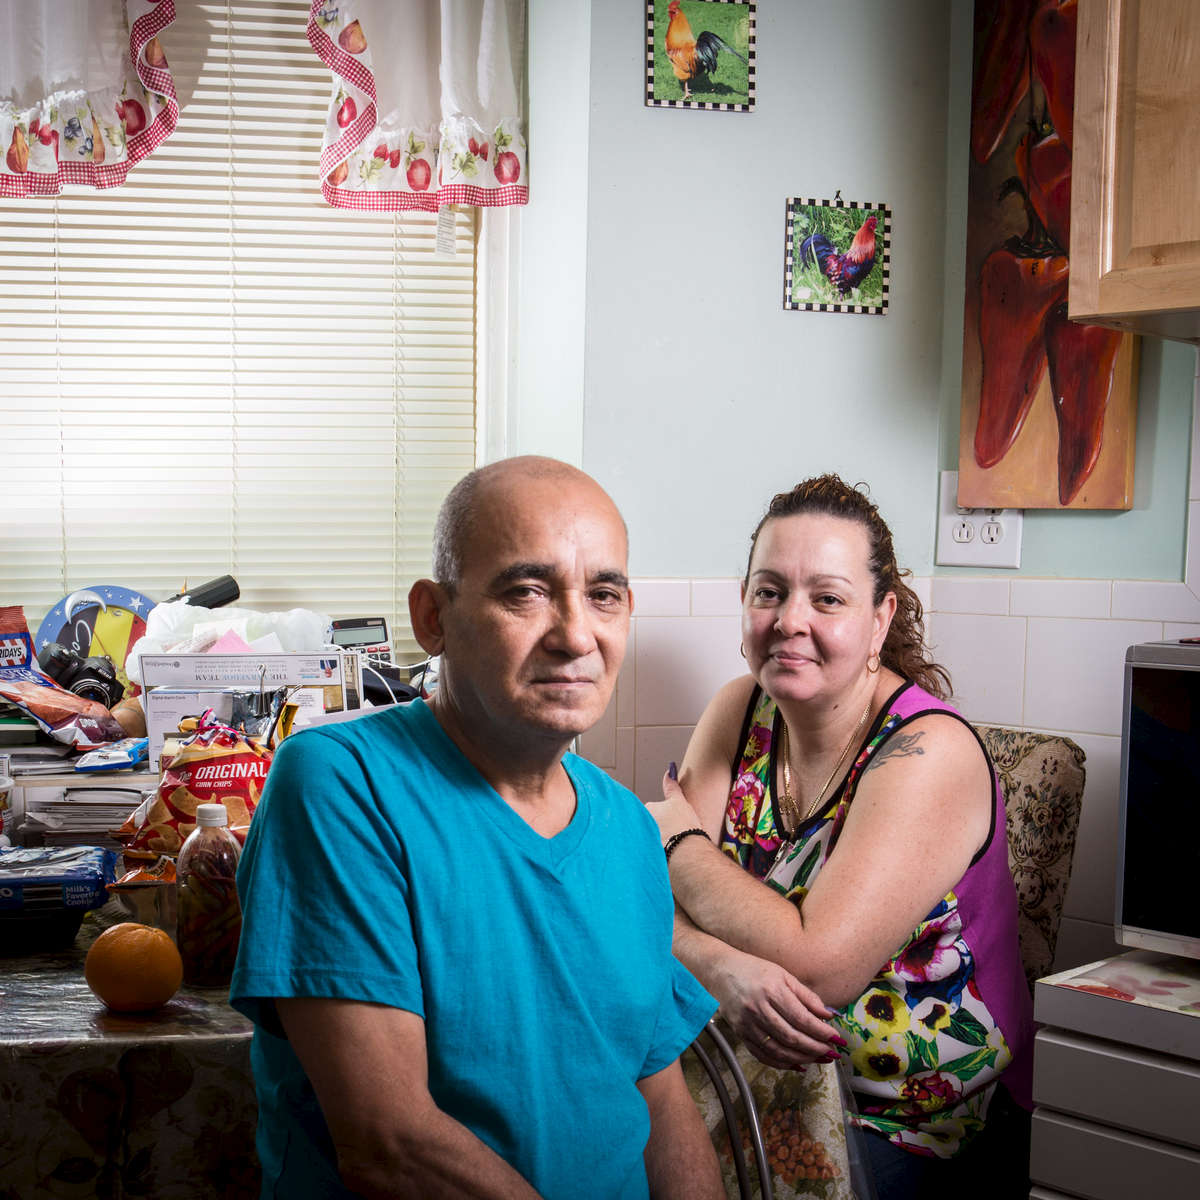 4thstnyc99 #eastfourth street's Building Superintendent, Gute and his wife Maritza in their basement apartment they share with their teenage son. Both from Puerto Rico, Gute and Maritza have been married 13 years and Gute has been the Super for 16 years.